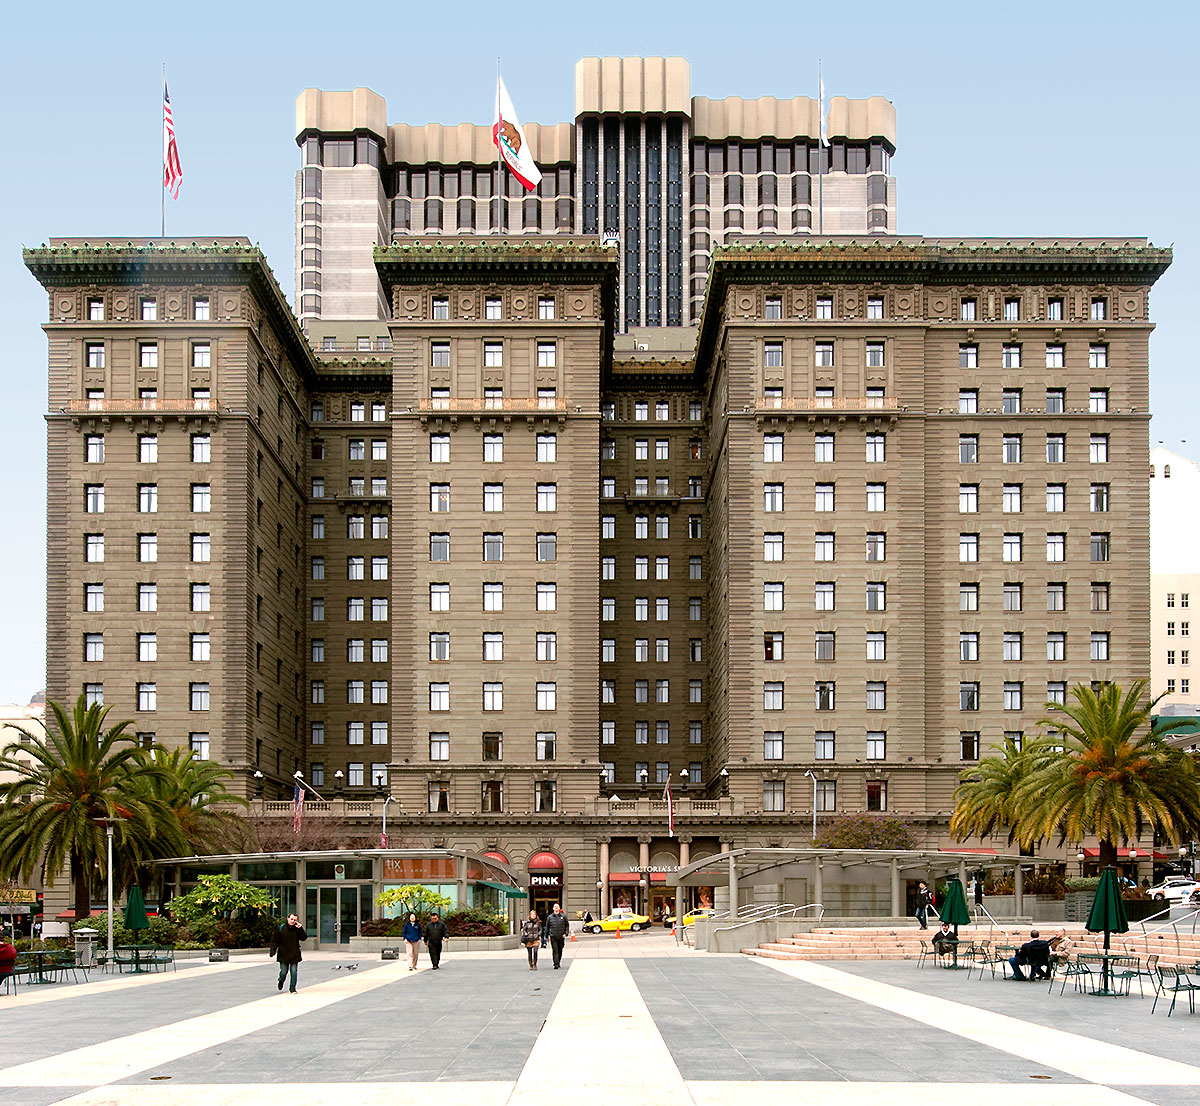 The St. Francis Hotel was designed by Bliss & Faville and built in 1904.